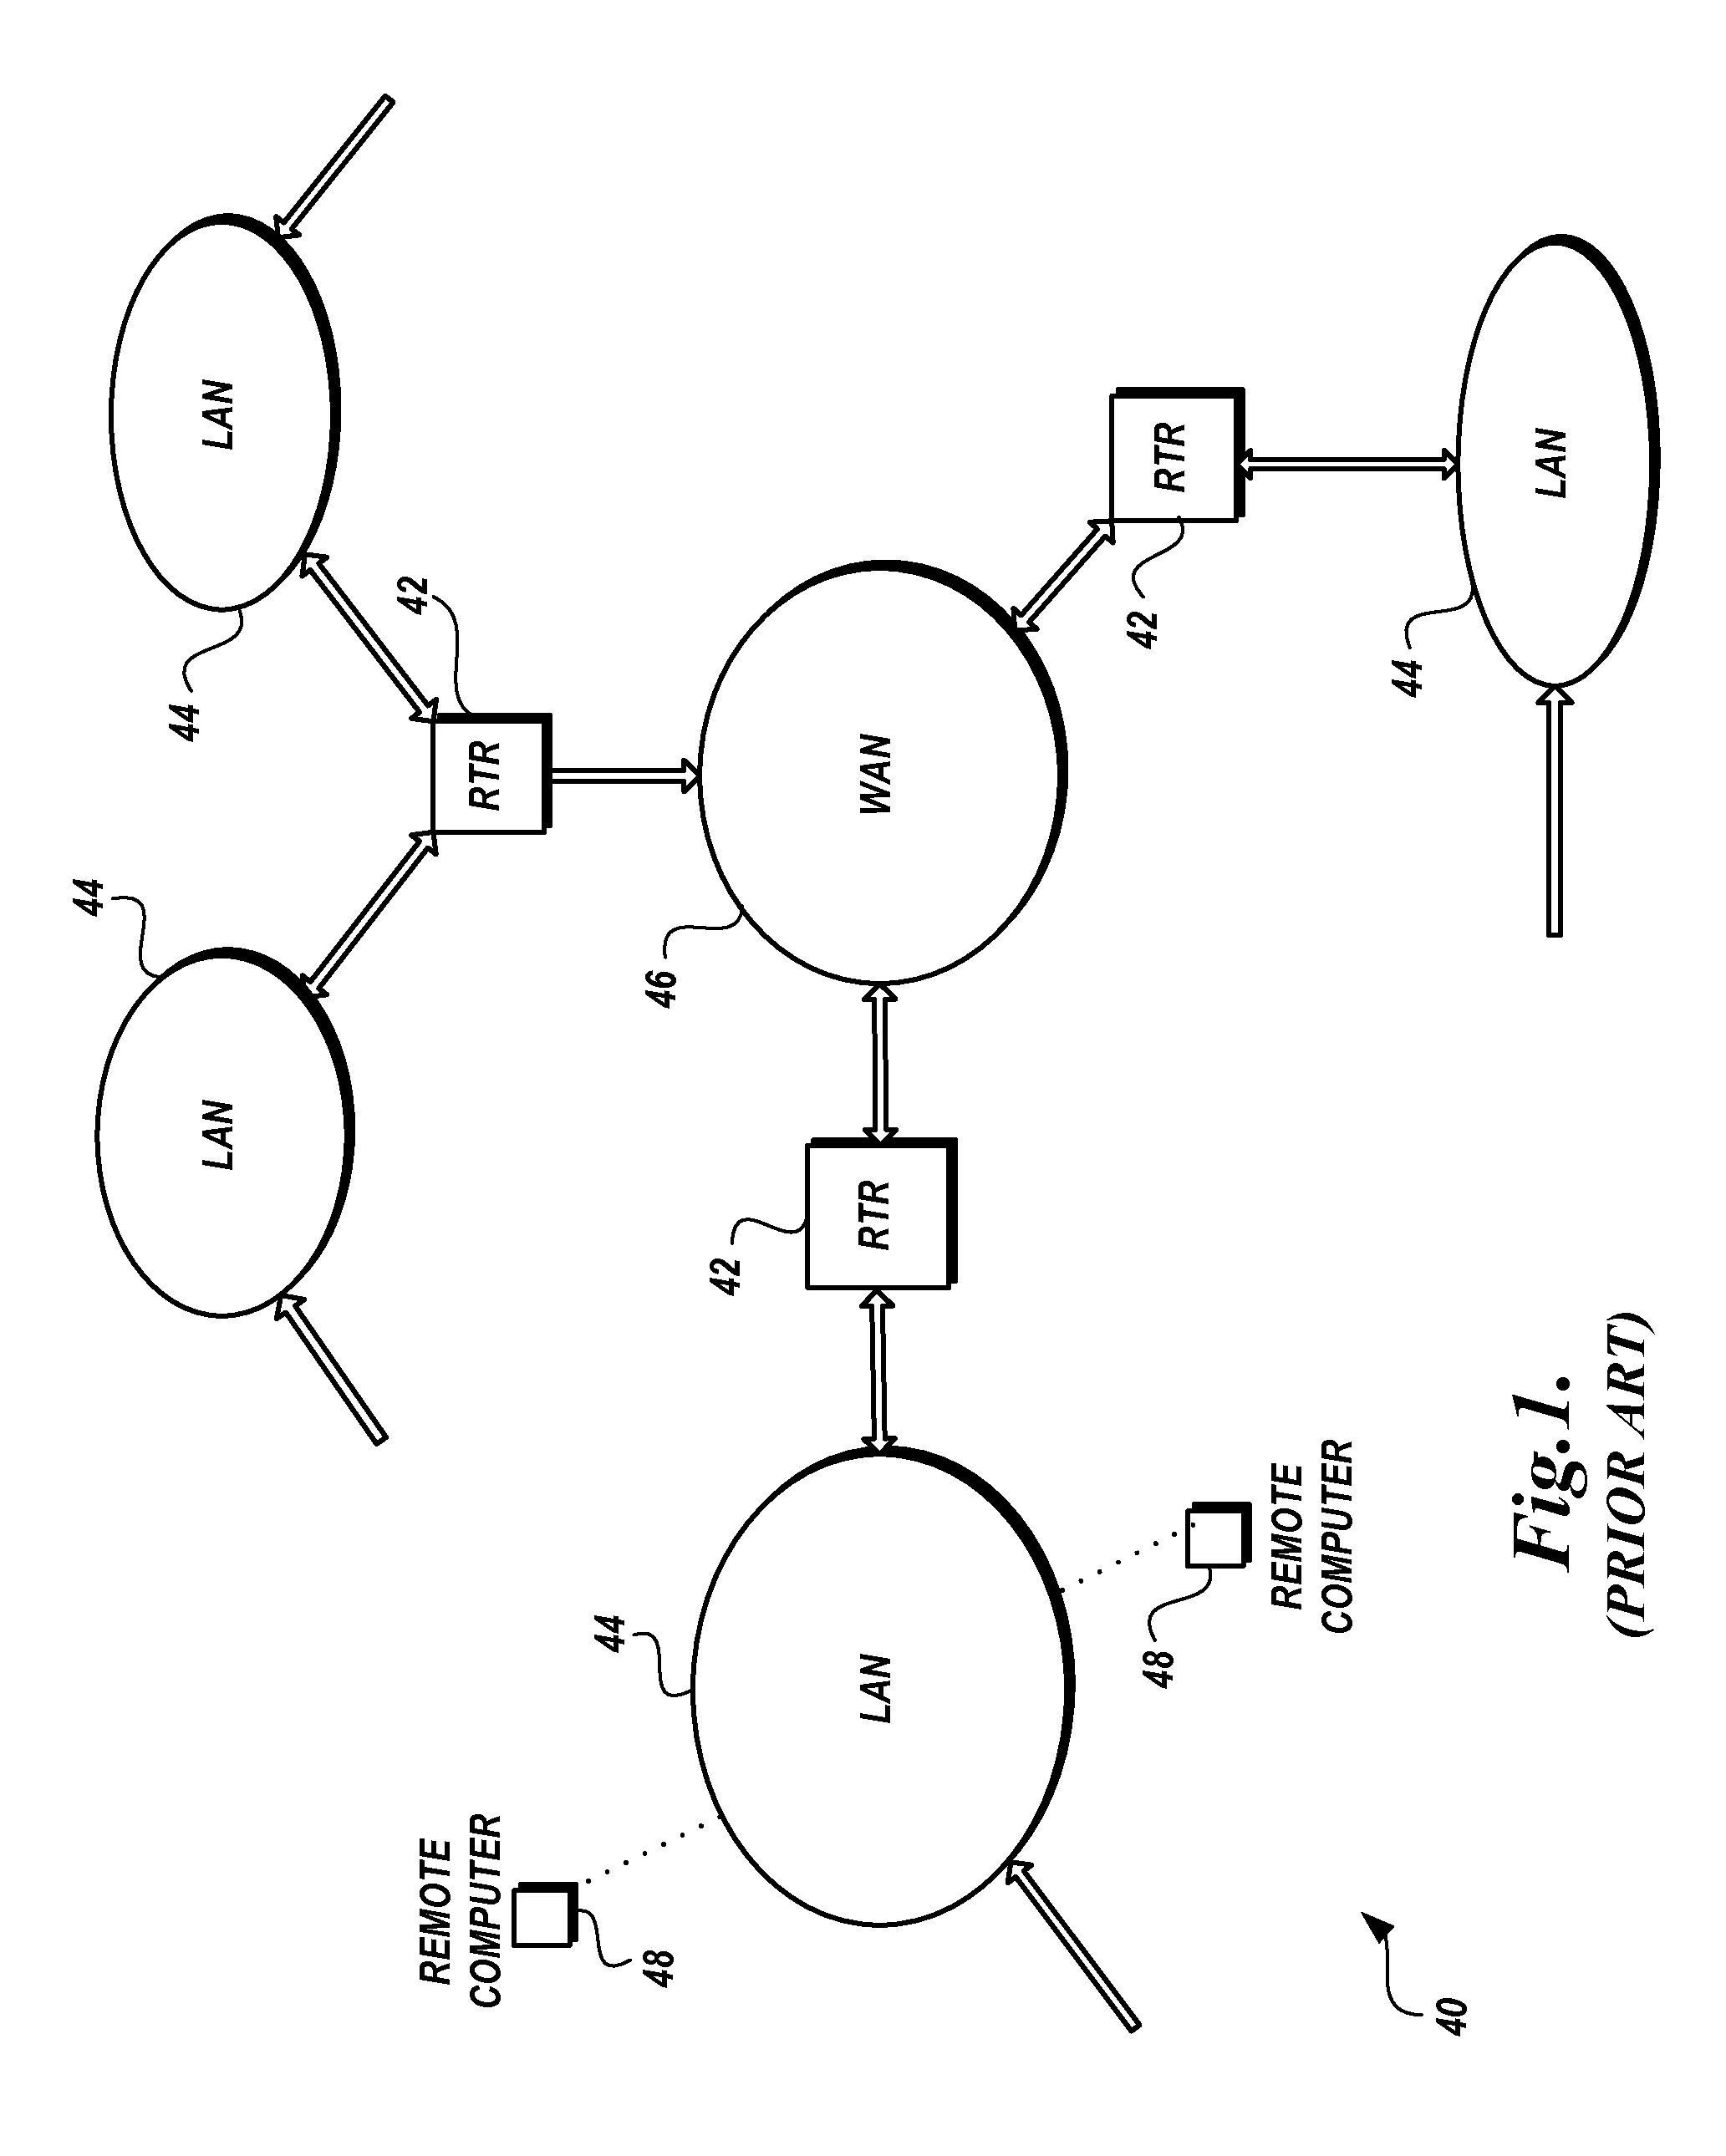 Method and apparatus for ordering goods, services and content over an internetwork using a virtual payment account